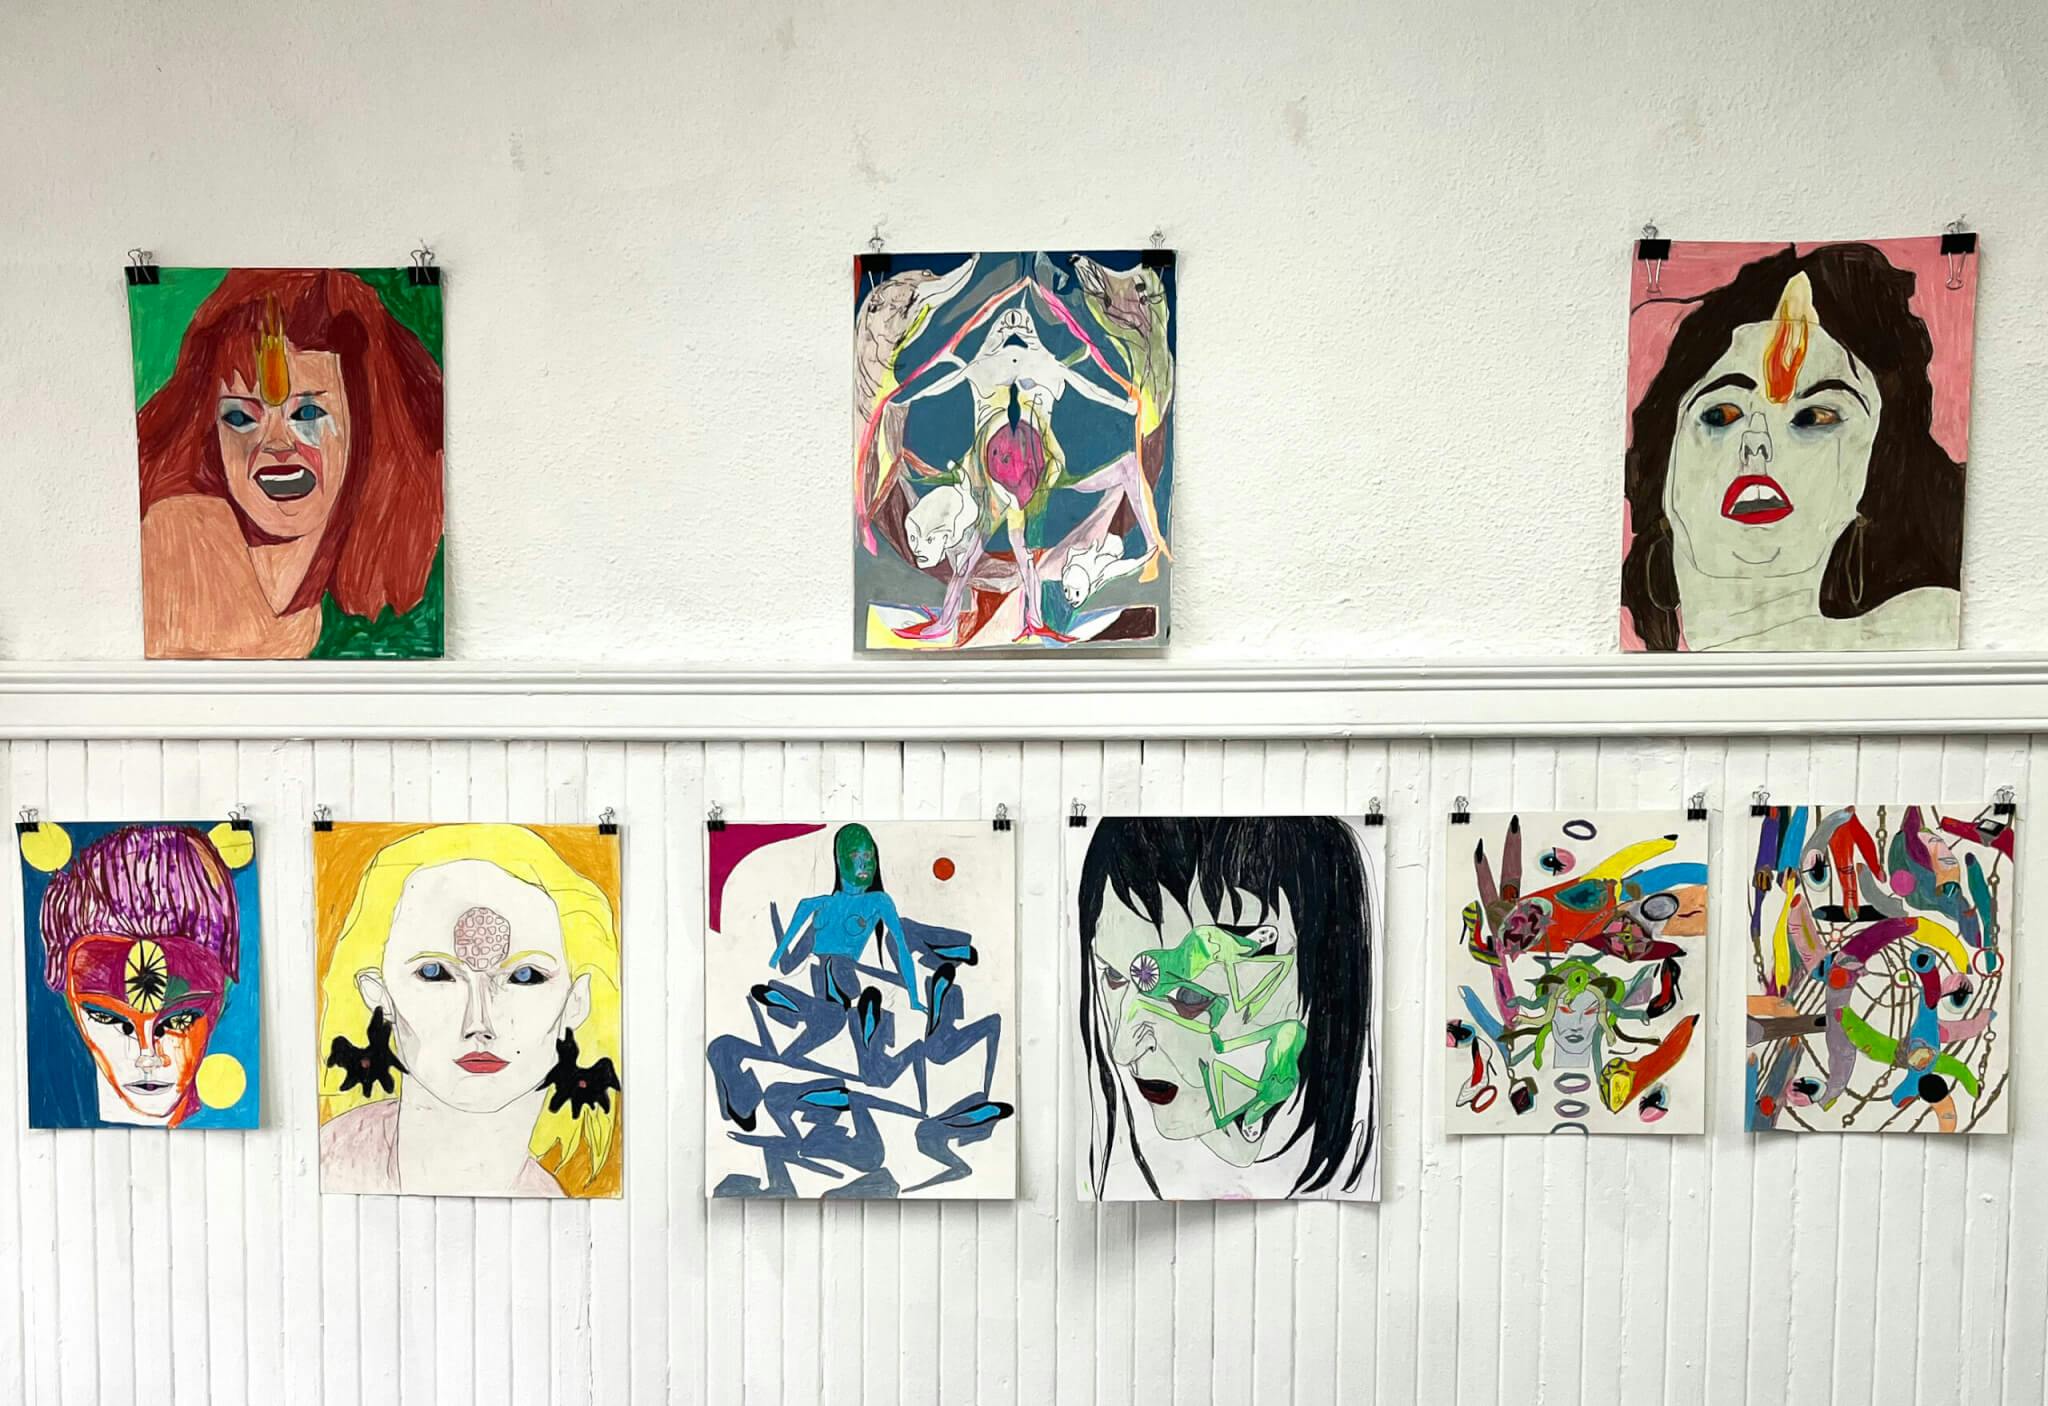 Colorful designs, many of faces, adorn the white walls of Shoe Bones Gallery.